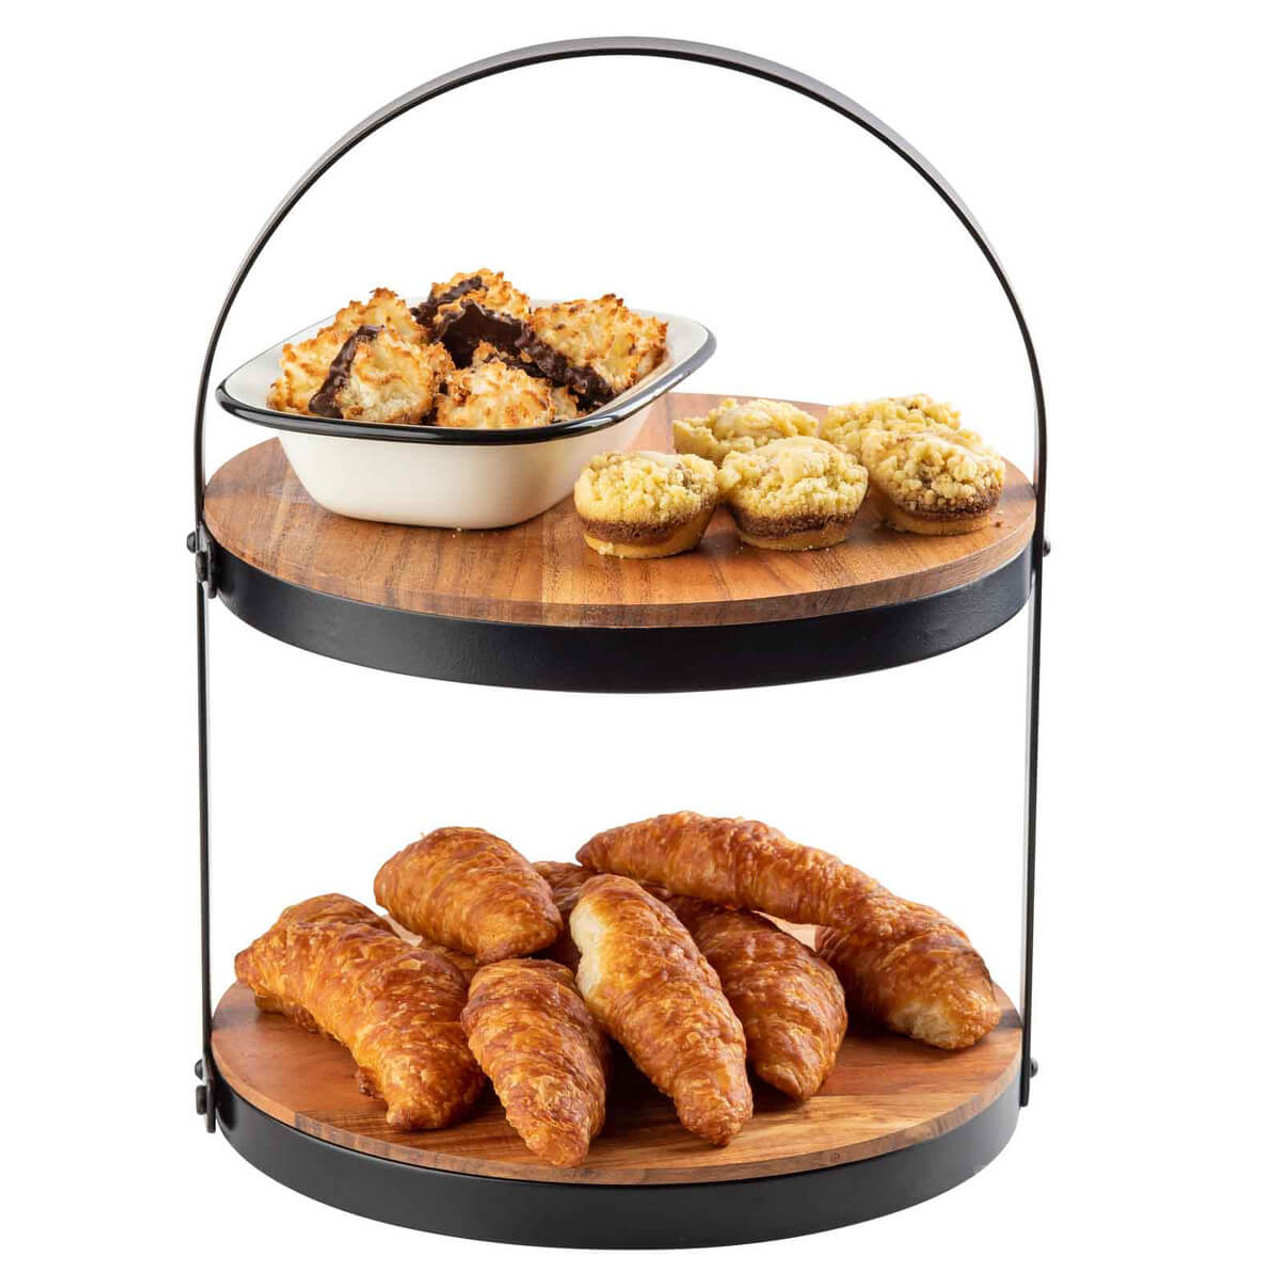 Tablecraft Two Tier Round Wood Acacia Display Stand (2-Pack) - 11 3/4" x 11 3/8" x 15" - Stylish Display Solution